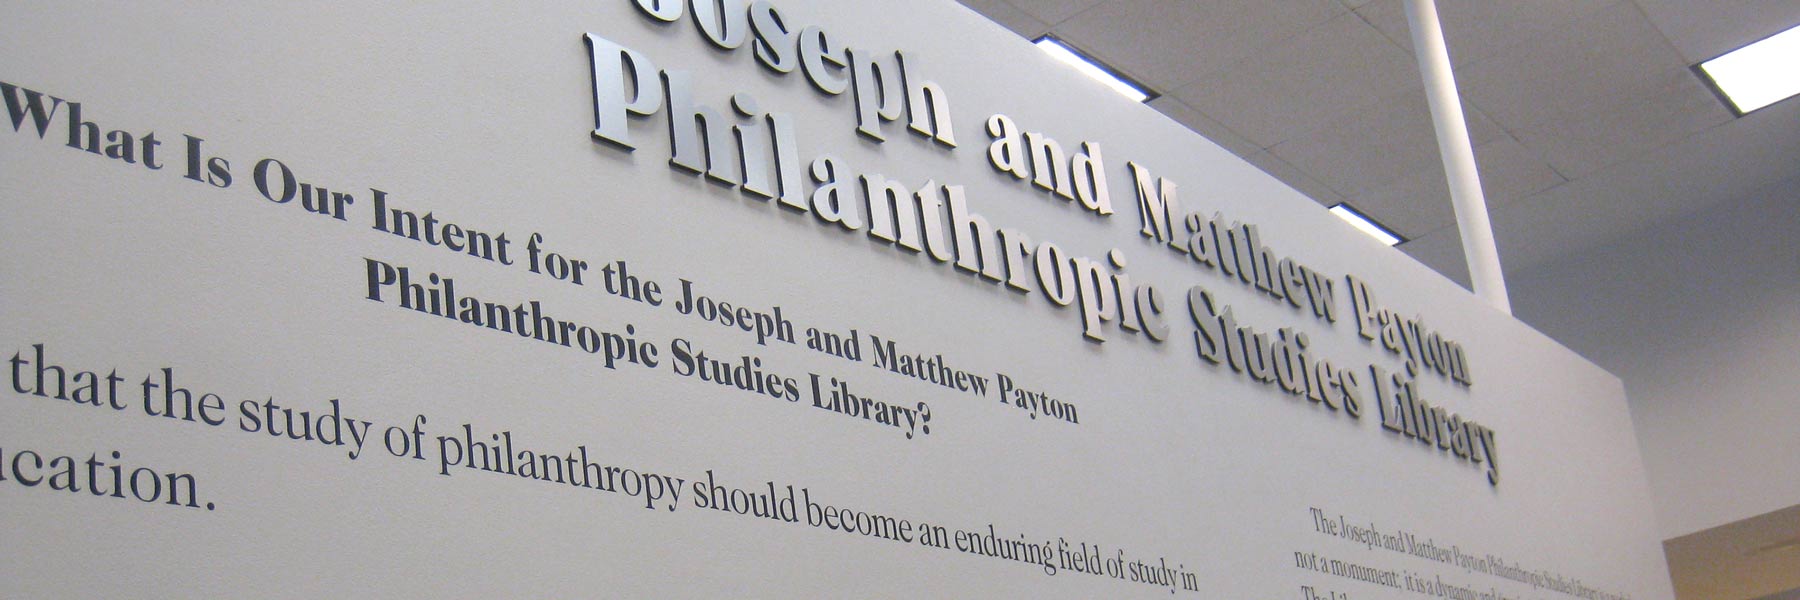 Quotes displayed on a wall inside the Philanthropic Studies Library